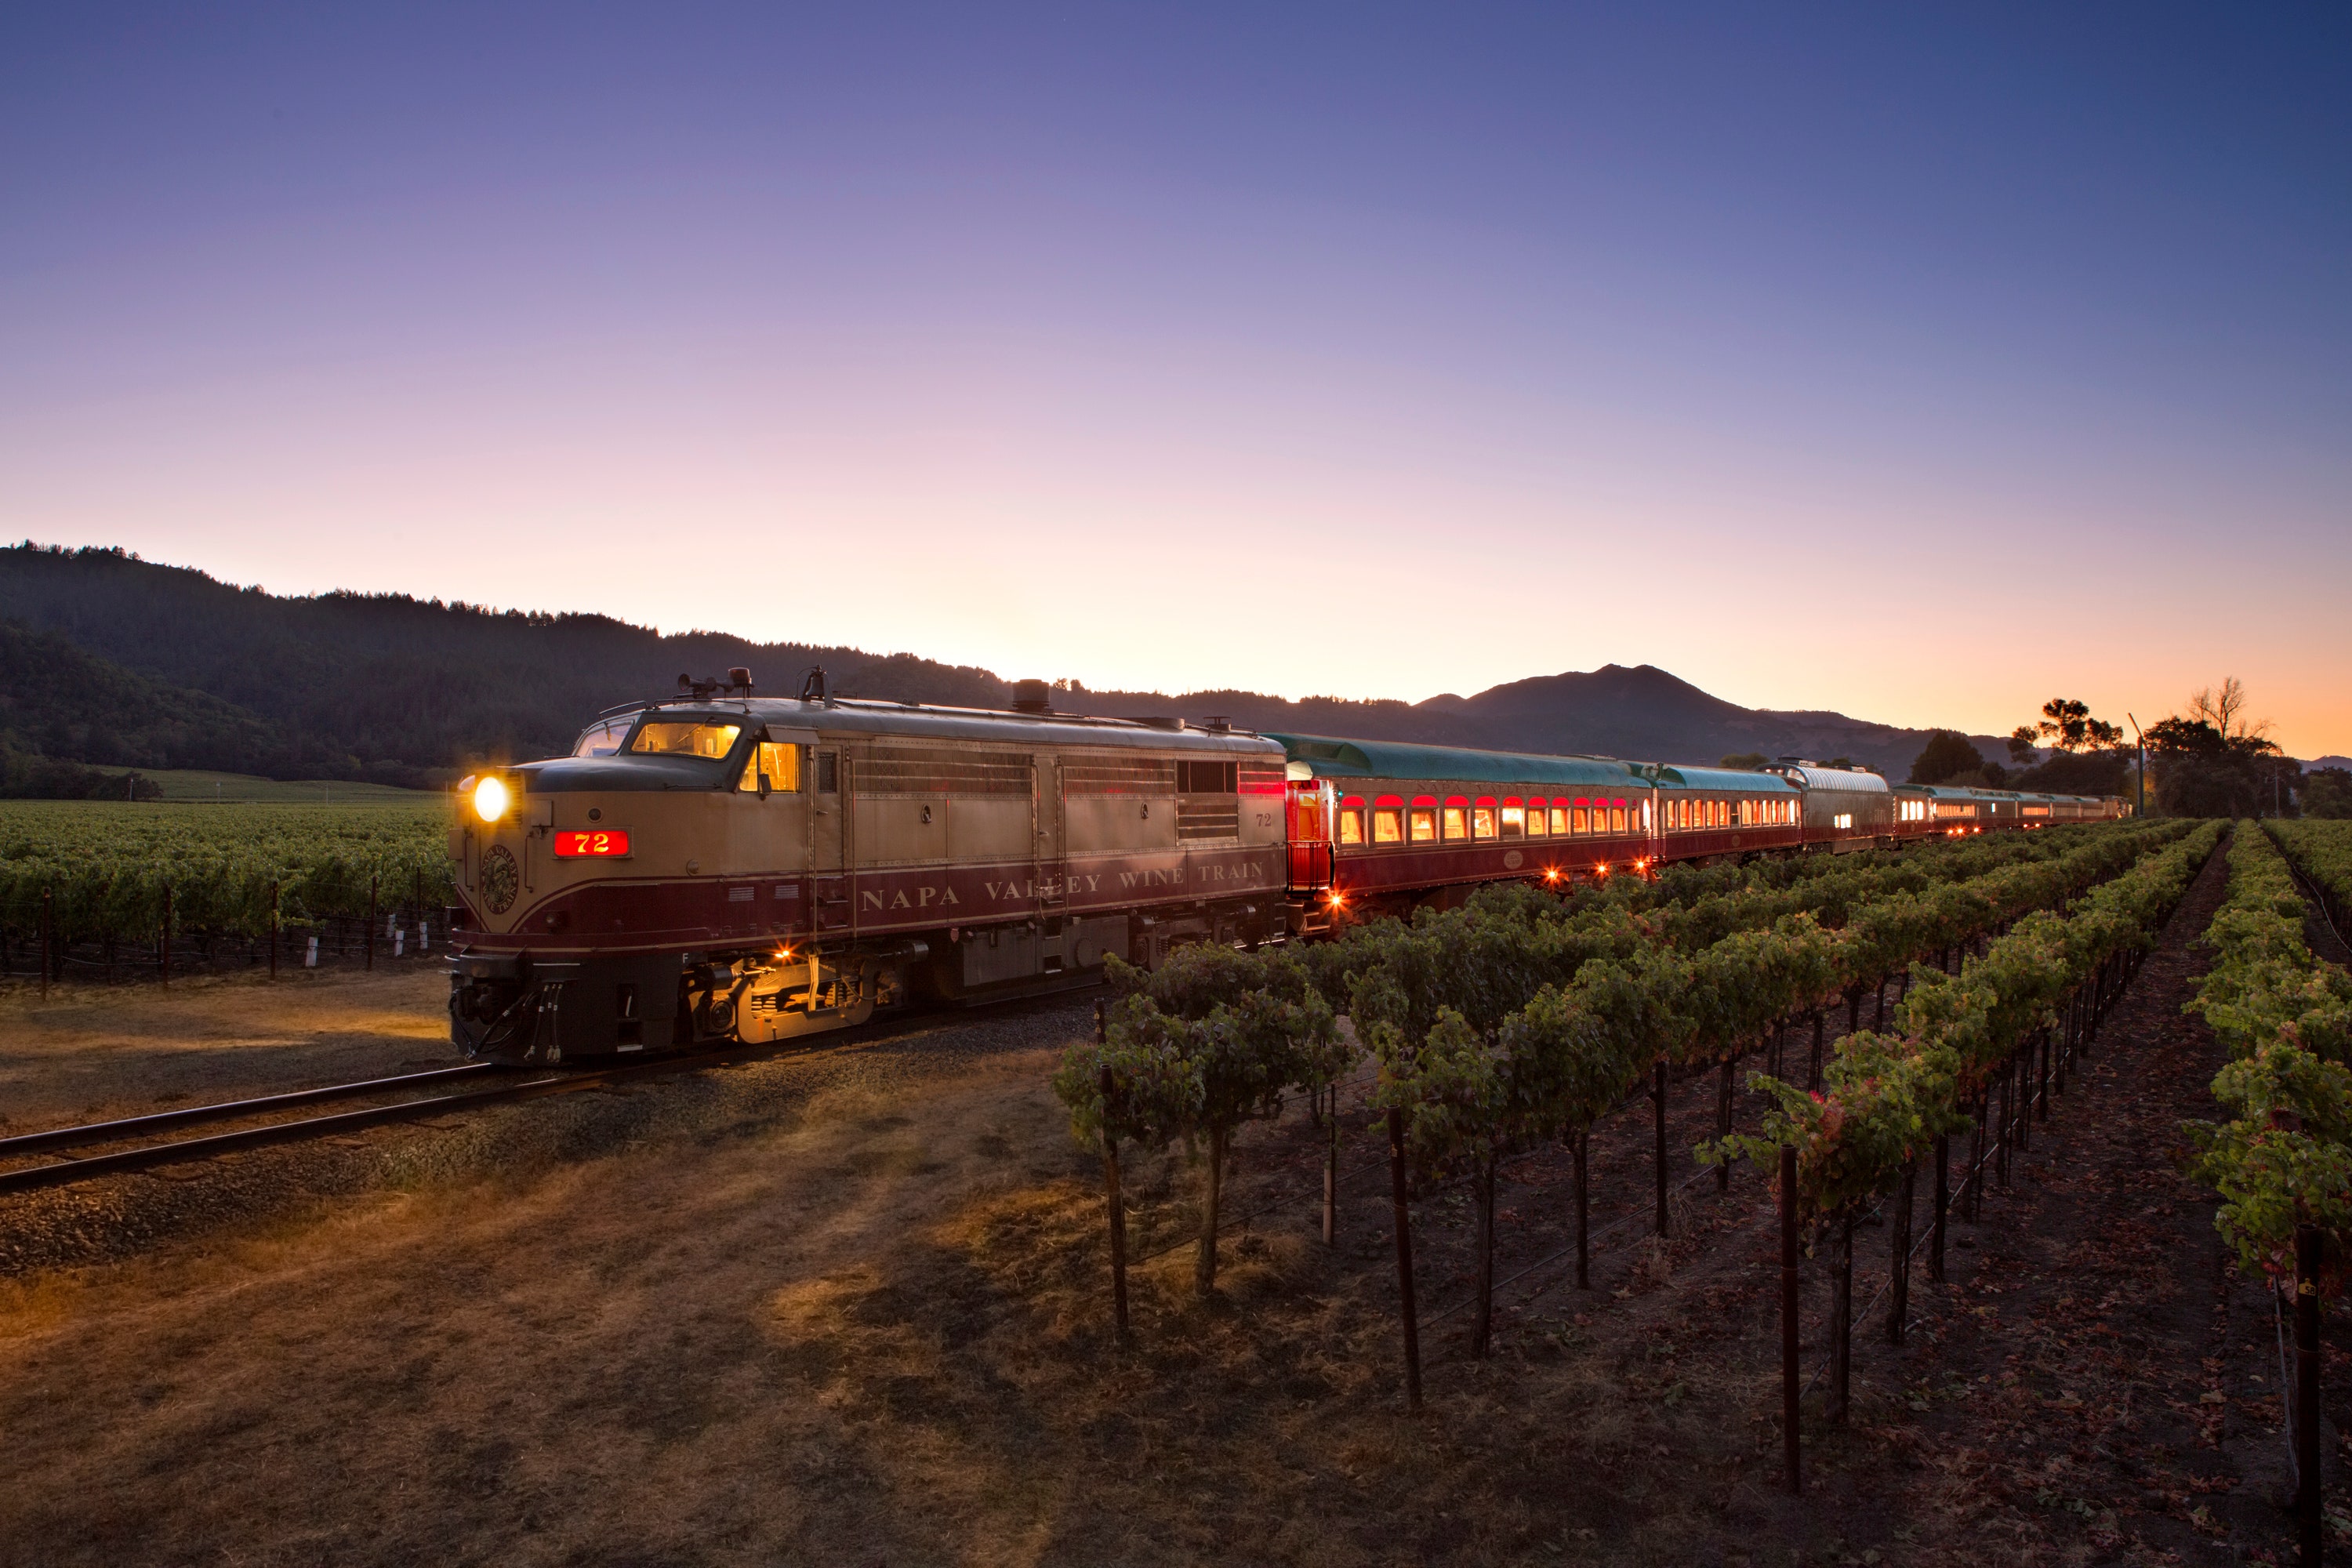 <p>You don’t have to be a wine connoisseur to appreciate the natural beauty of northern <a href="http://www.cntraveler.com/stories/2015-05-21/where-thomas-keller-thinks-you-should-go-in-napa?mbid=synd_msn_rss&utm_source=msn&utm_medium=syndication">Napa Valley’s</a> agricultural corridor. Originally built by a local millionaire, California Gold Rush baron Samuel Brannan in 1865 to transport Napa visitors to a spa resort in Calistoga, the <a href="https://www.winetrain.com/">Napa Valley Wine Train</a> today gives travelers a chance to sip local vintages from a luxurious railcar while passing vaunted vineyards on a three-hour round-trip journey.</p> <p><a href="https://www.winetrain.com/our-tours/">Tickets vary based on package</a>.</p><p>Sign up to receive the latest news, expert tips, and inspiration on all things travel</p><a href="https://www.cntraveler.com/newsletter/the-daily?sourceCode=msnsend">Inspire Me</a>